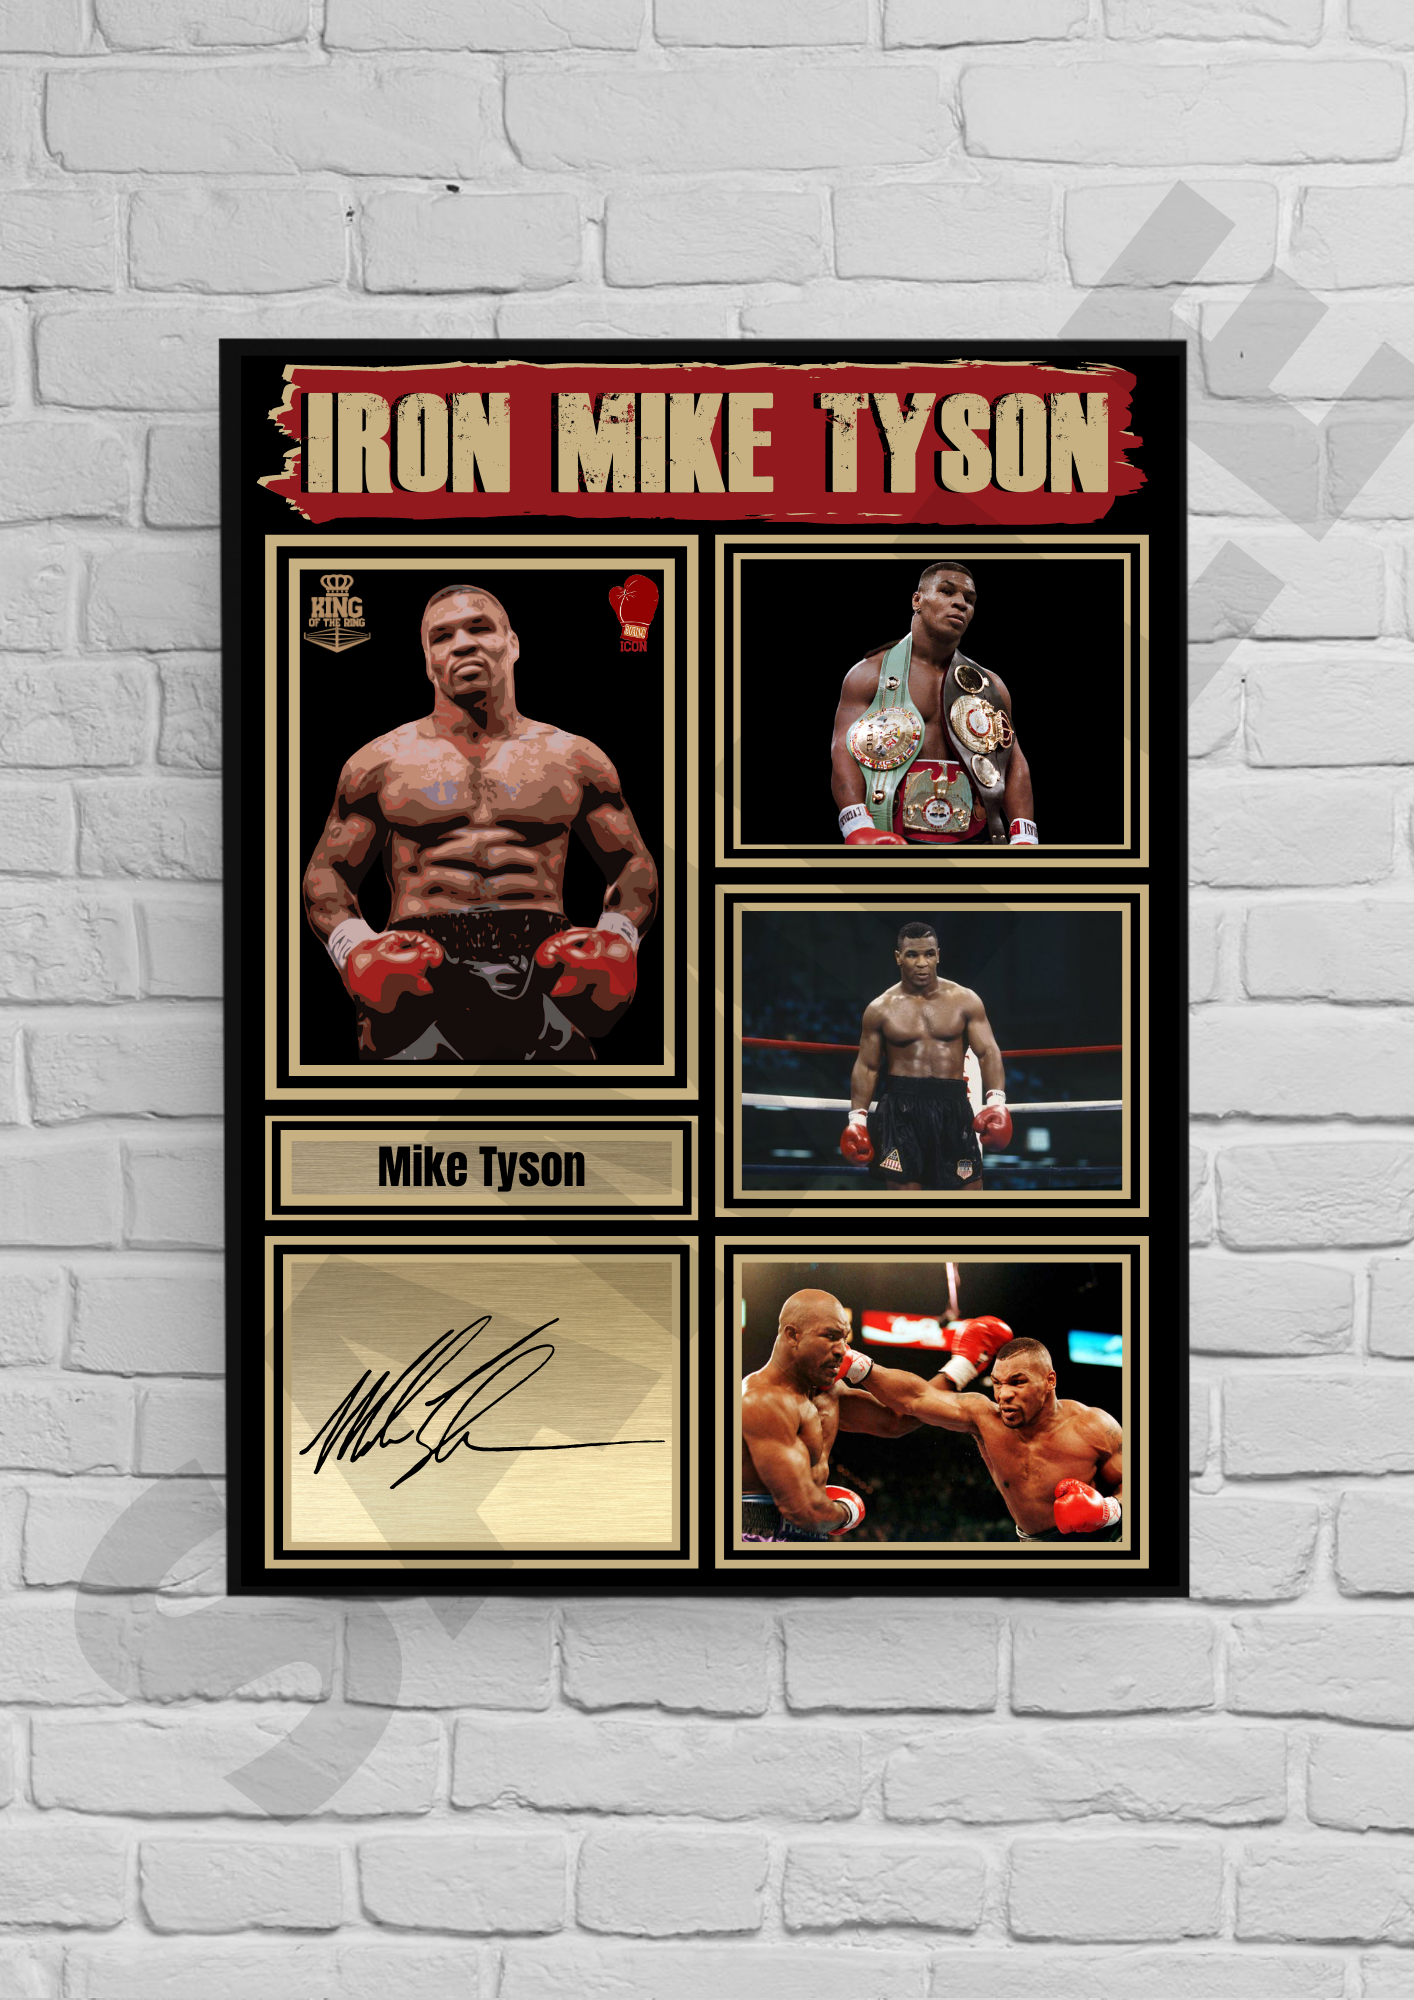 Iron Mike Tyson (Boxing) Collectable/Memorabilia#54 - Signed print